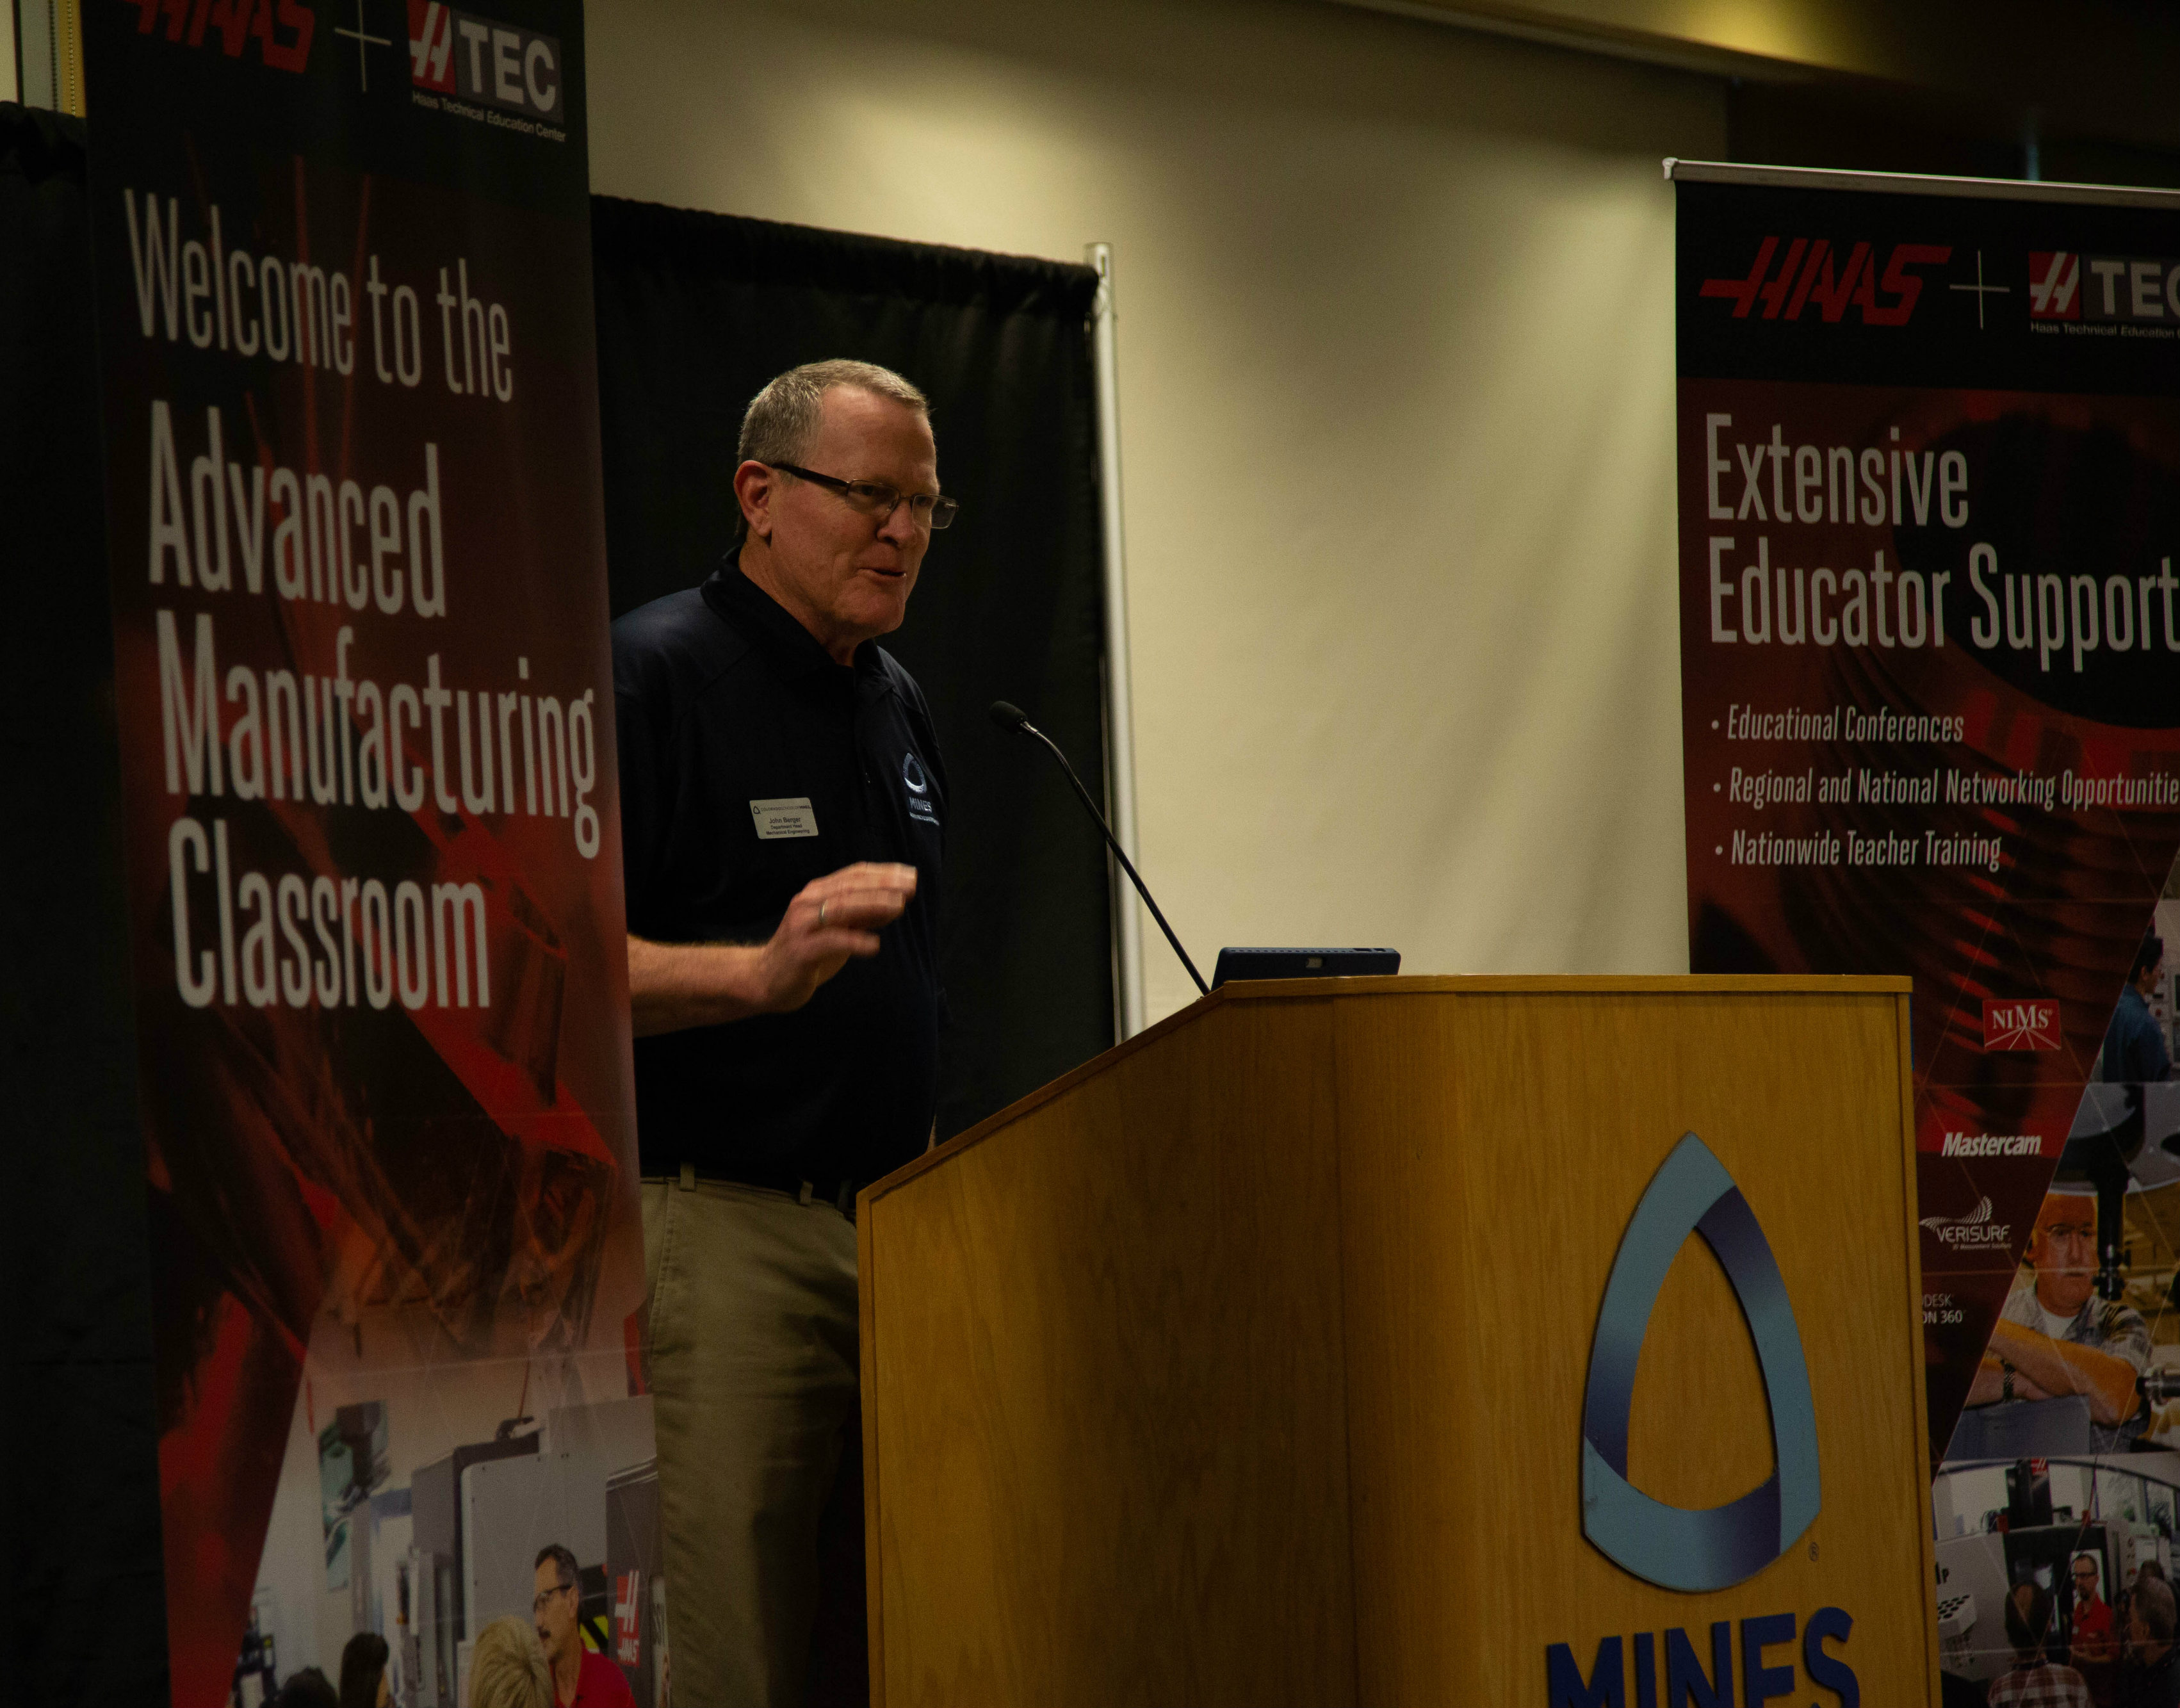 Mines Professor John Berger at the 2nd Rocky Mountain Regional HTEC CNC Educator Conference